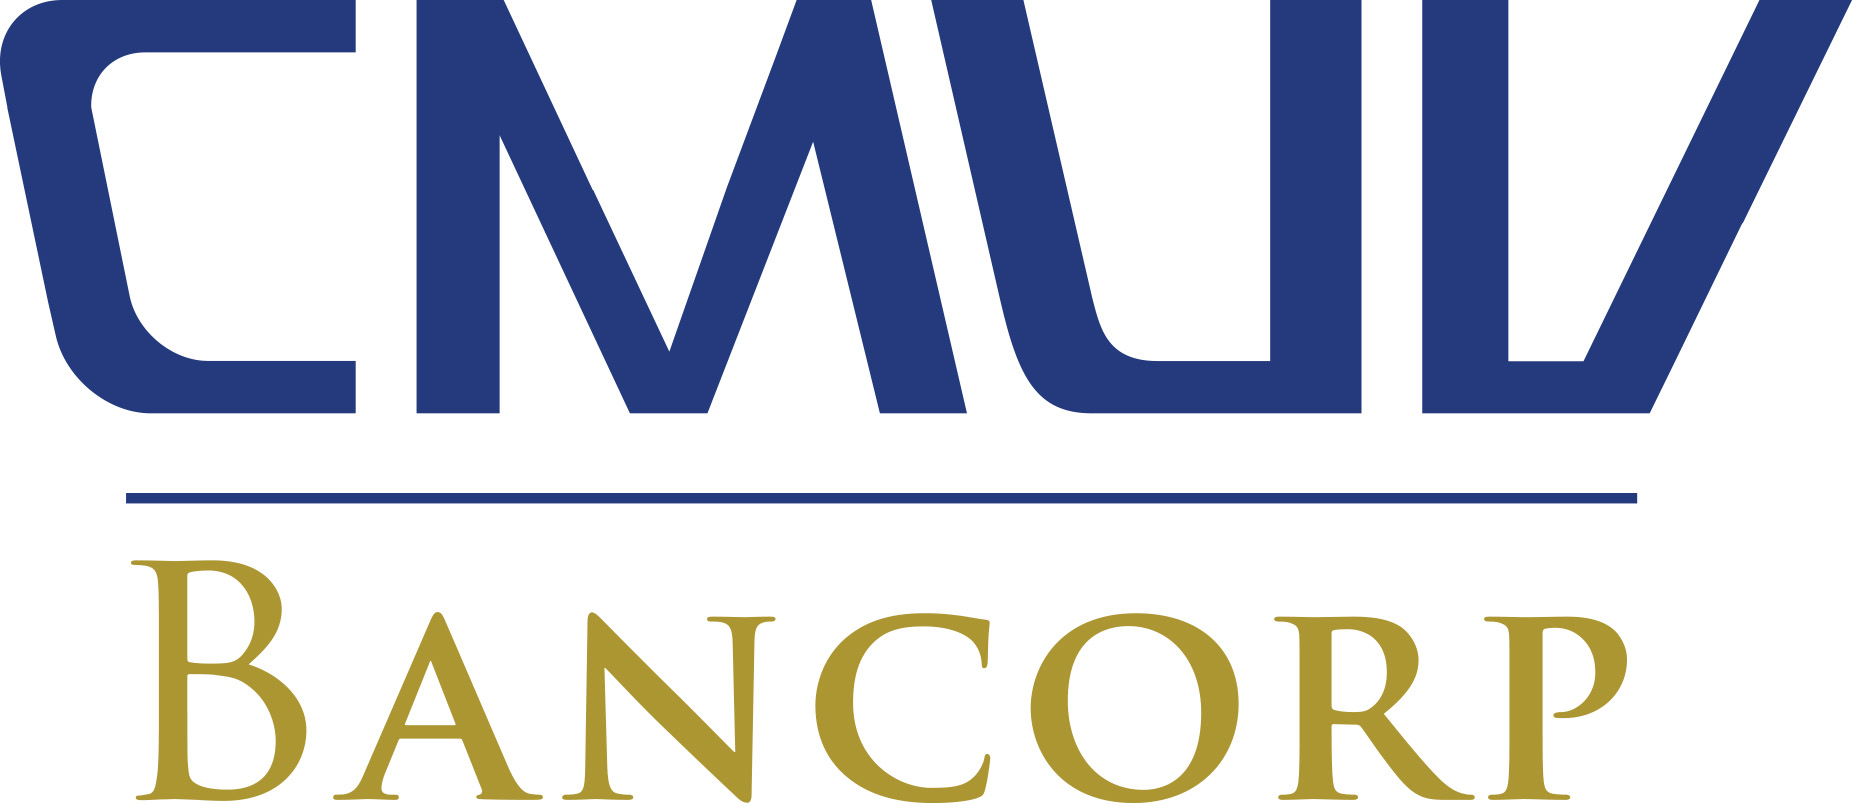 CMUV Bancorp Announces 20% Increase in the Quarterly